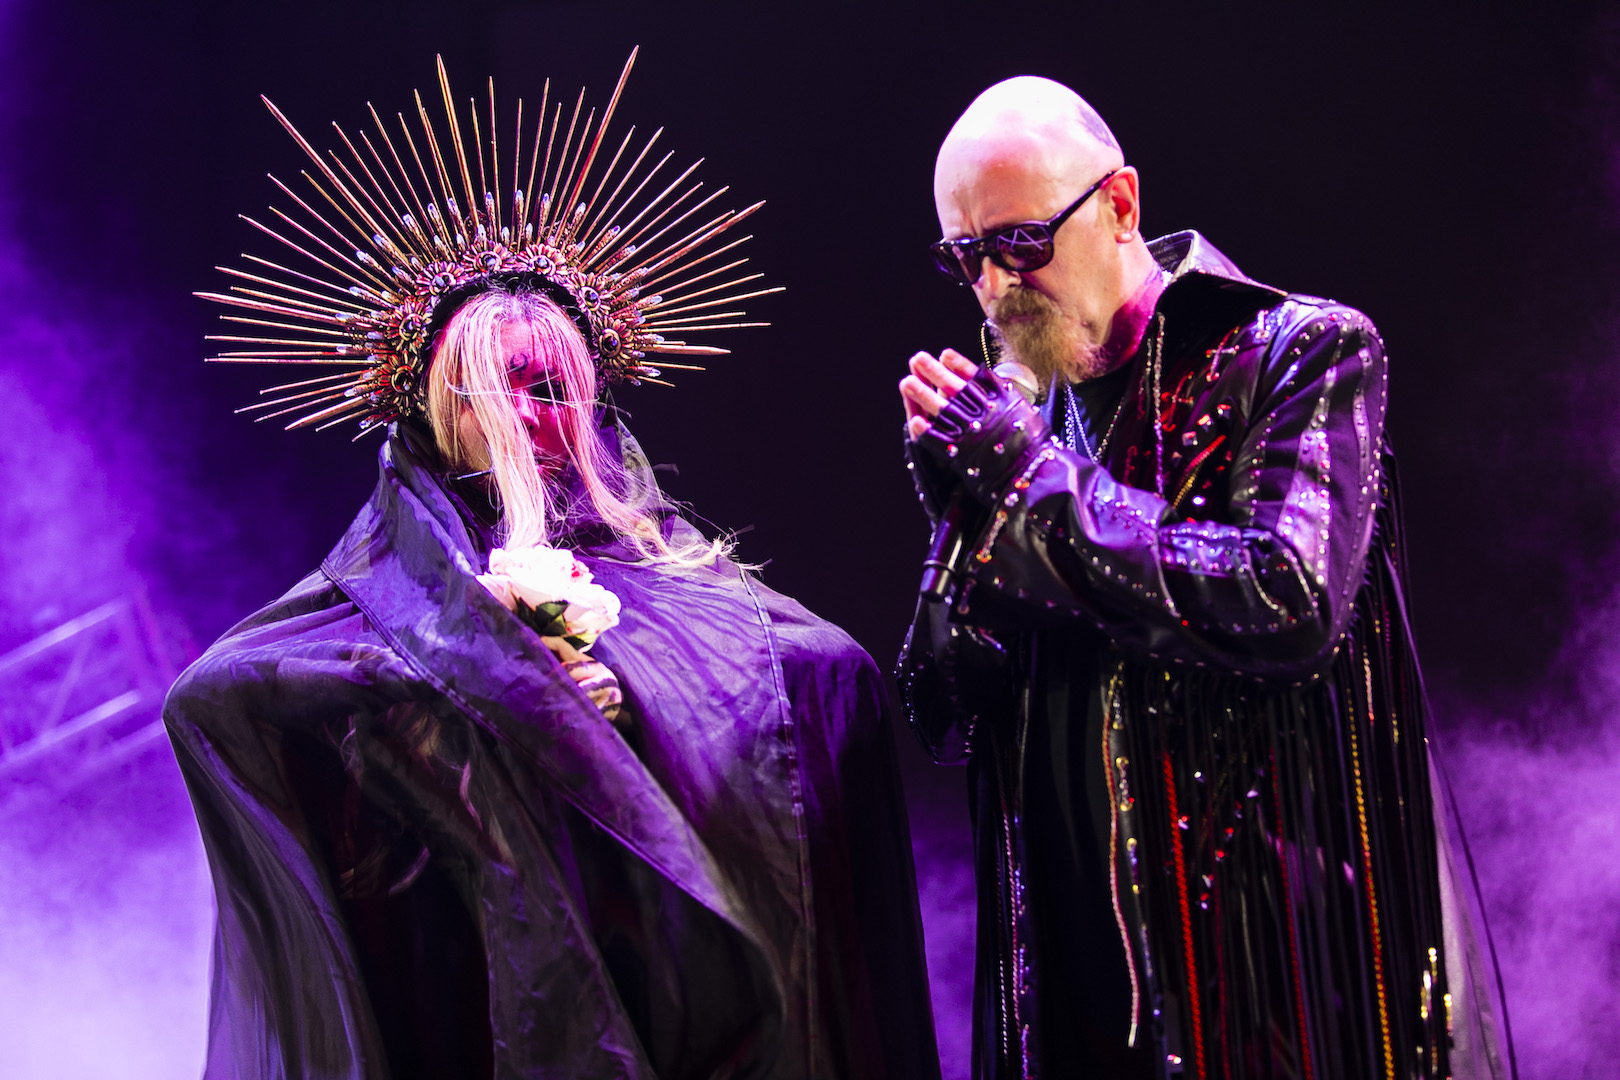 Maria Brink of In This Moment and Rob Halford of Judas Priest open the LOUDWIRE MUSIC AWARDS with a performance of "Black Wedding" (Billy Idol cover of "White Wedding"). Credit: Matt Stasi, 2017 Loudwire Music Awards. 